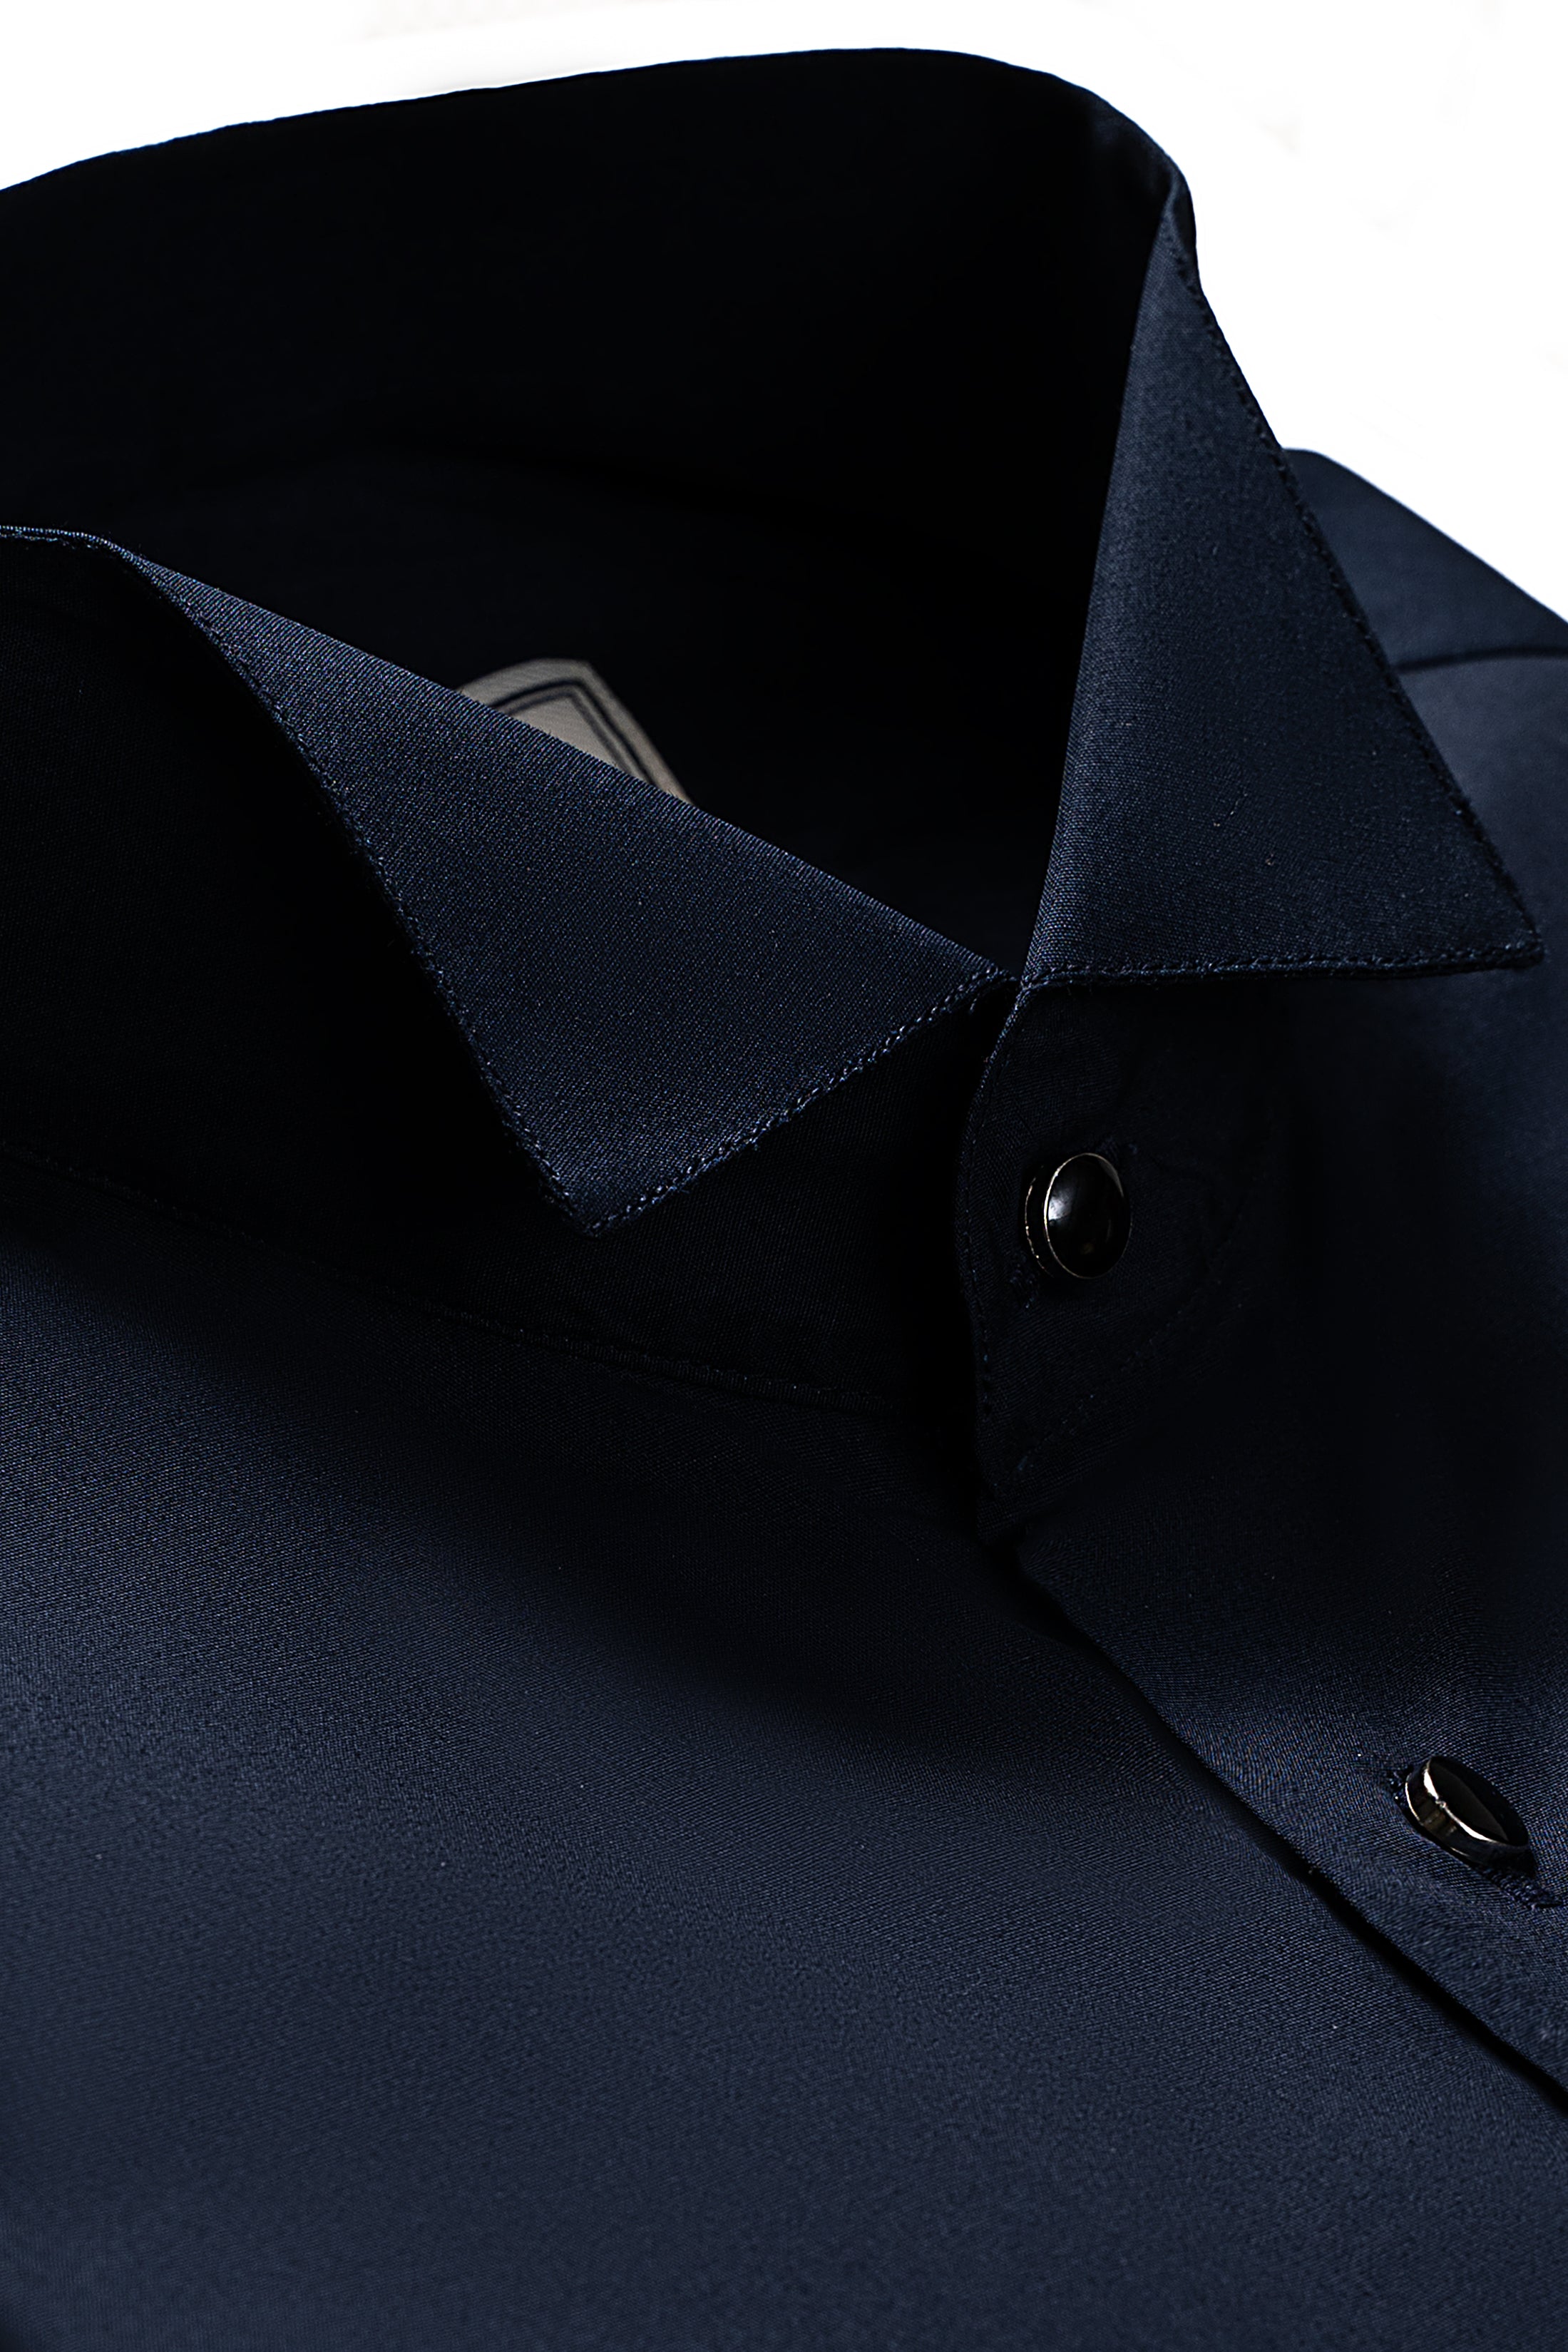 LIMITED EDITION SHIRT WING COLLAR NAVY